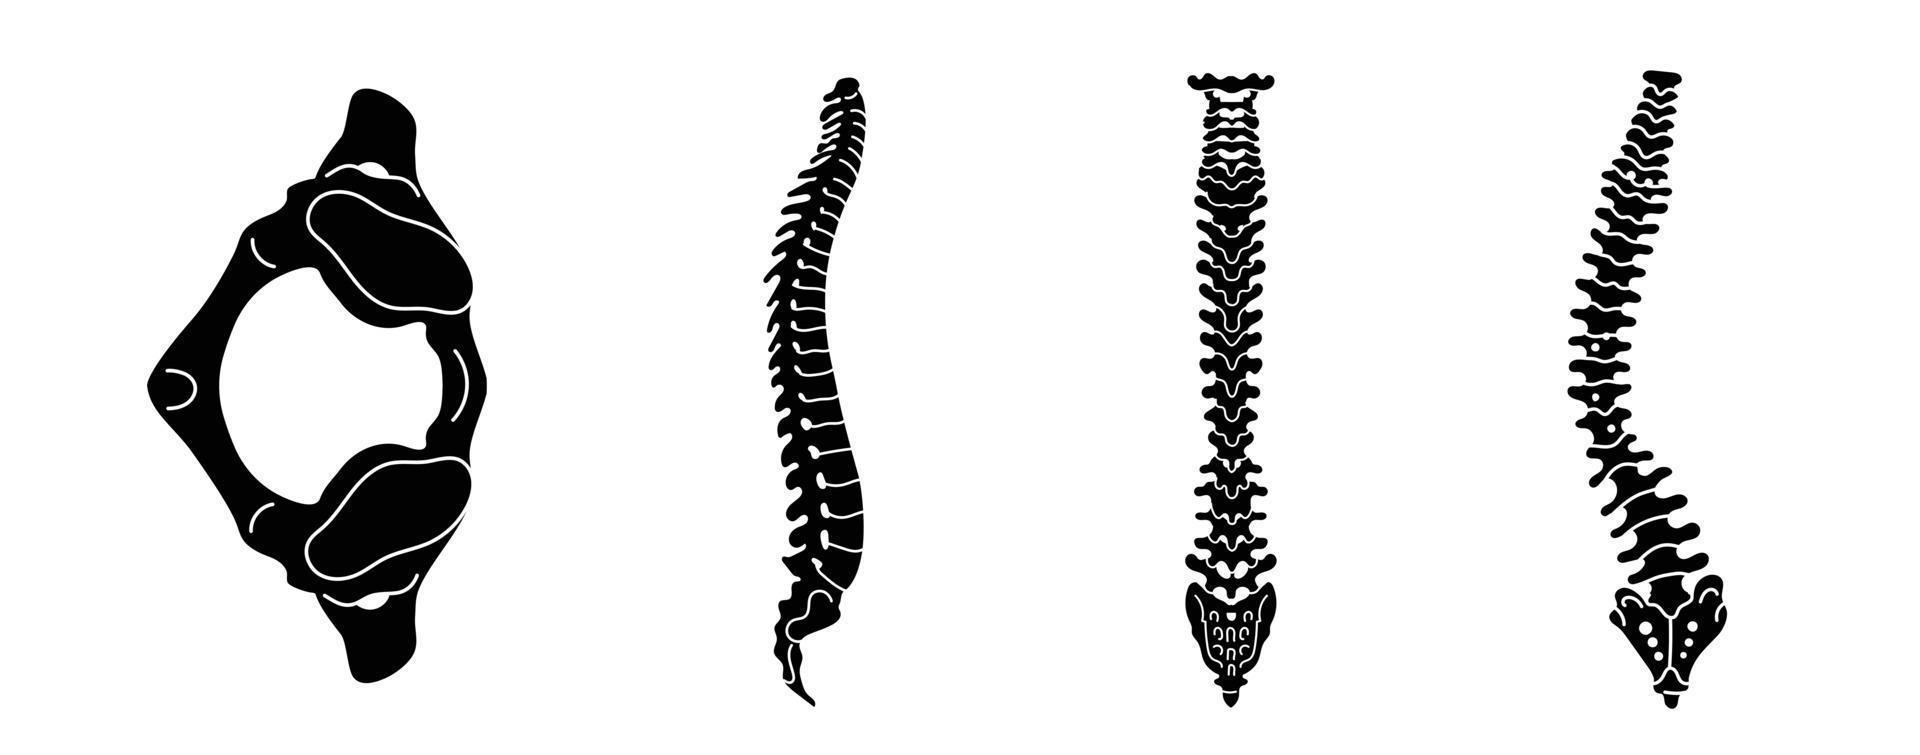 Spine icon set, simple style vector